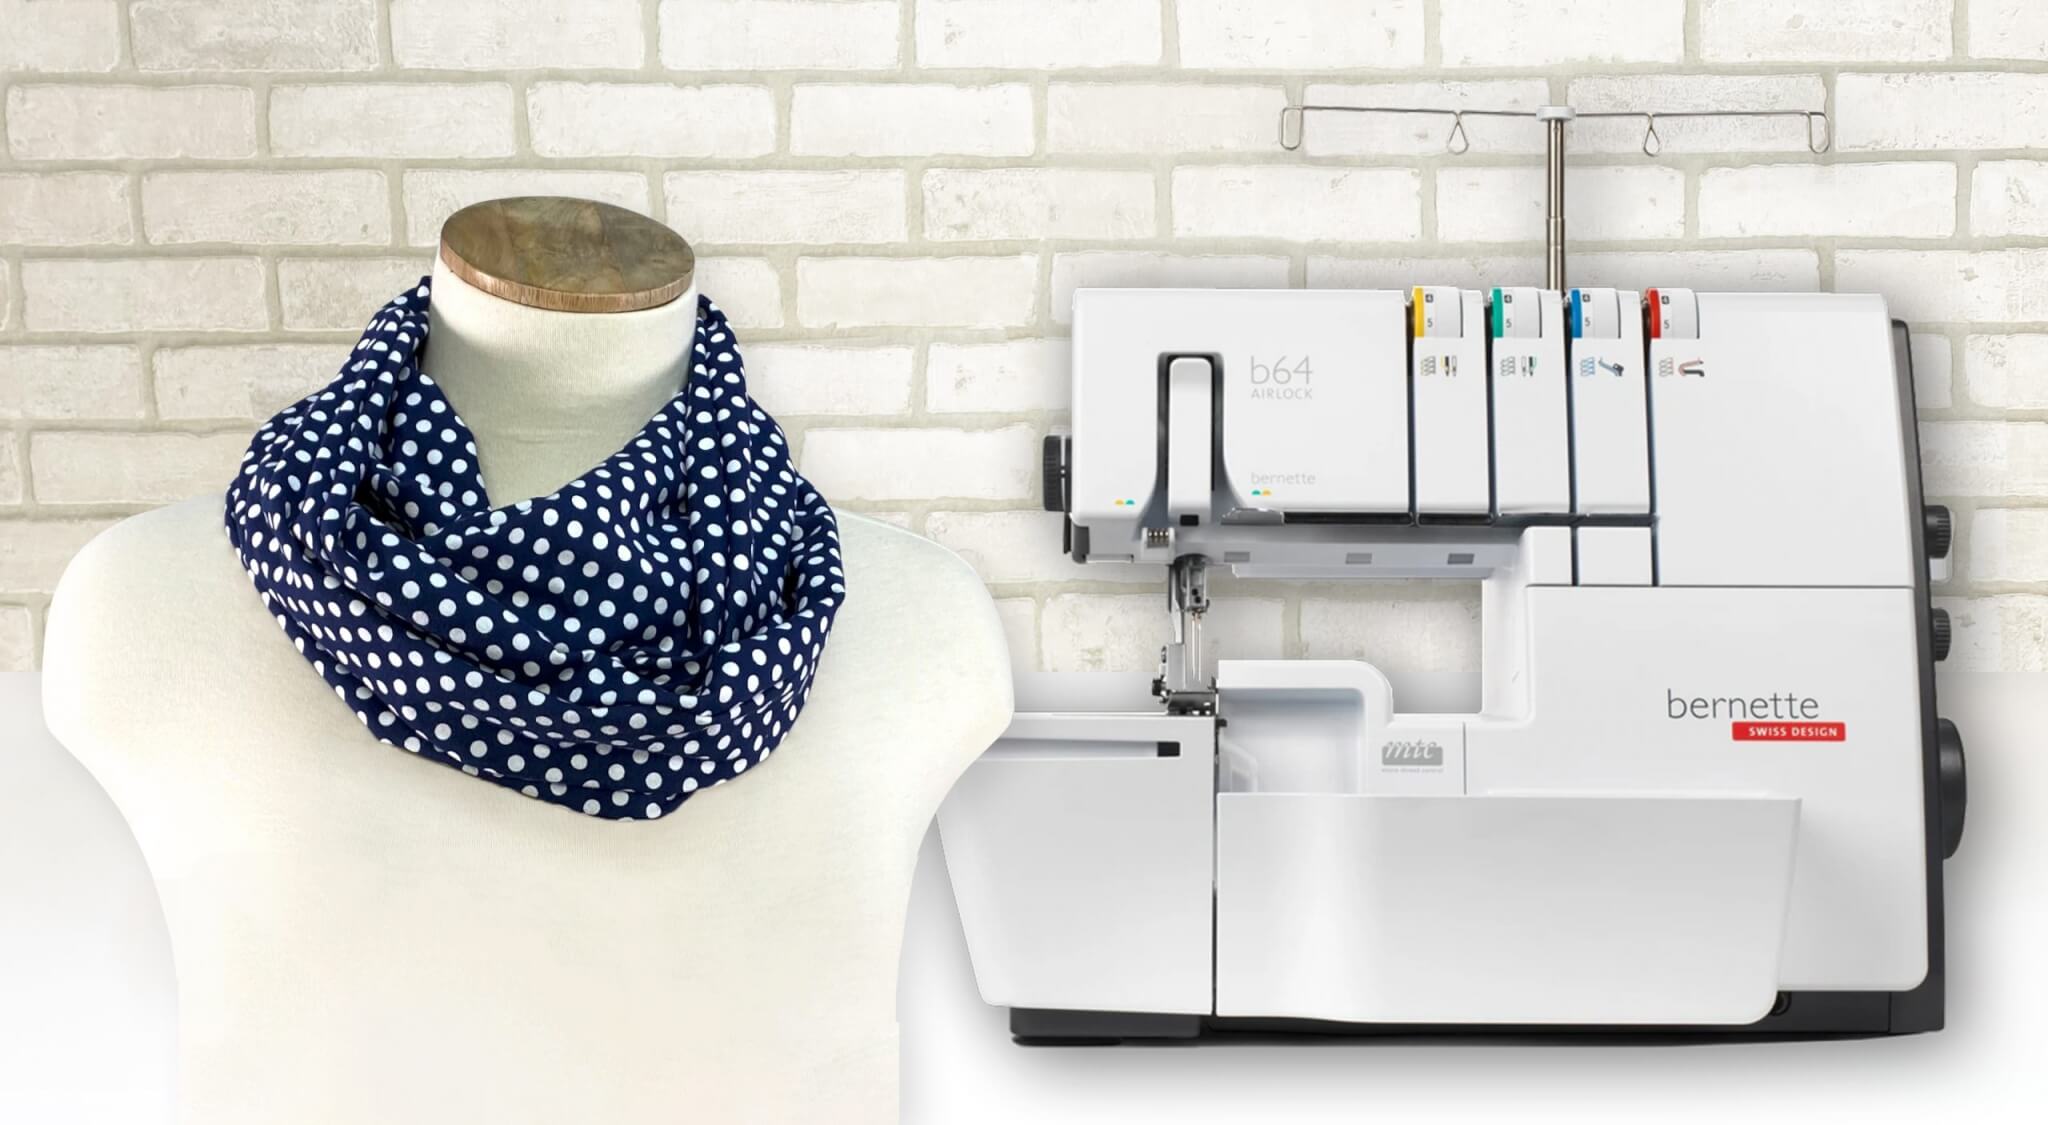 Twist it Loop Scarf Sewing Tutorial by the Stitch it Sisters at The Nancy Zieman Productions Blog Featuring bernette b64 scaled